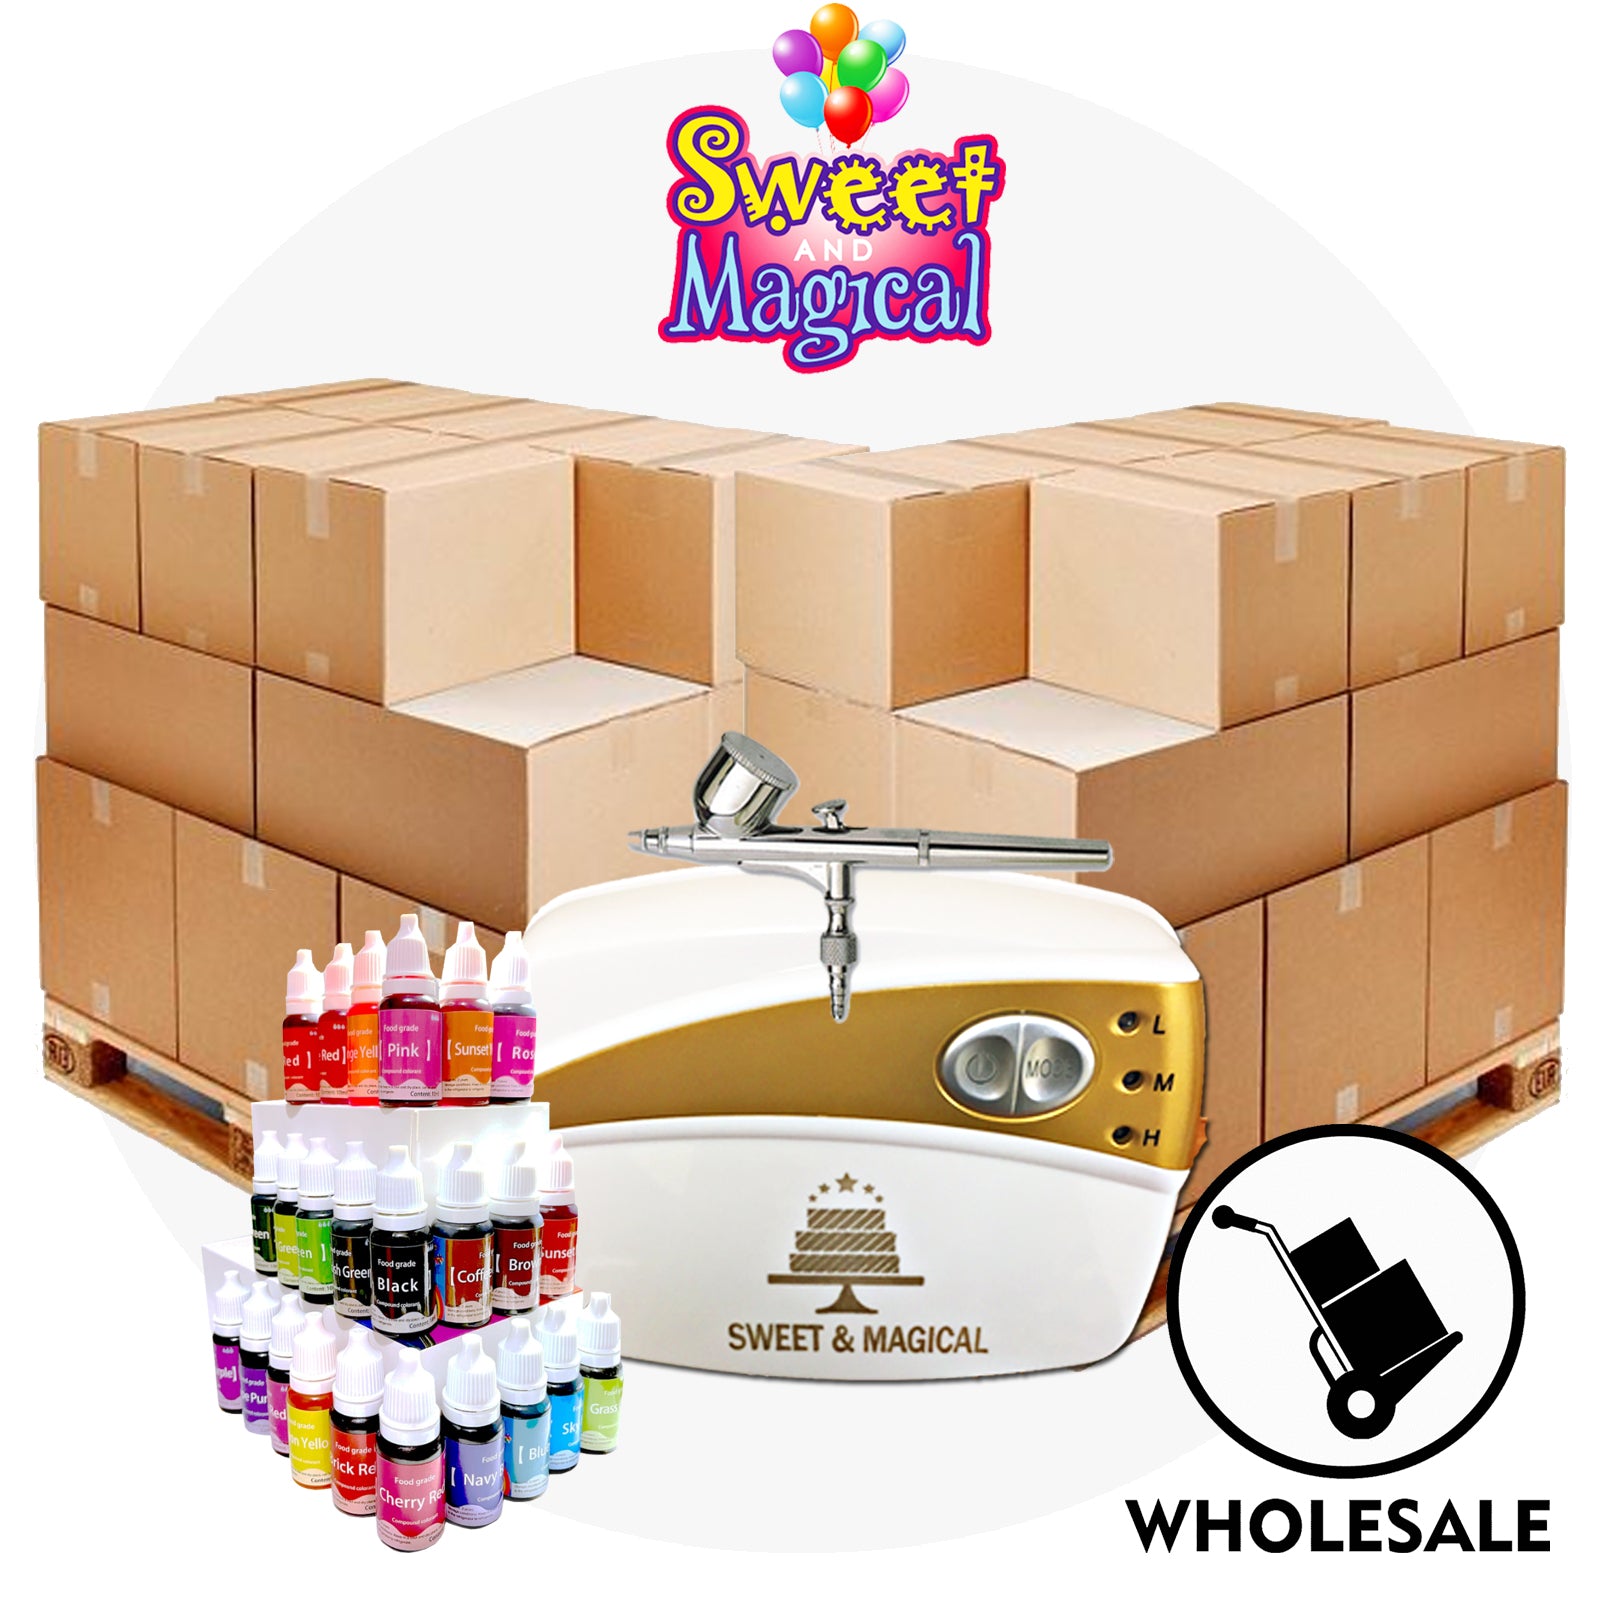 Airbrush Bundle, Wholesale, Sweet and Magical